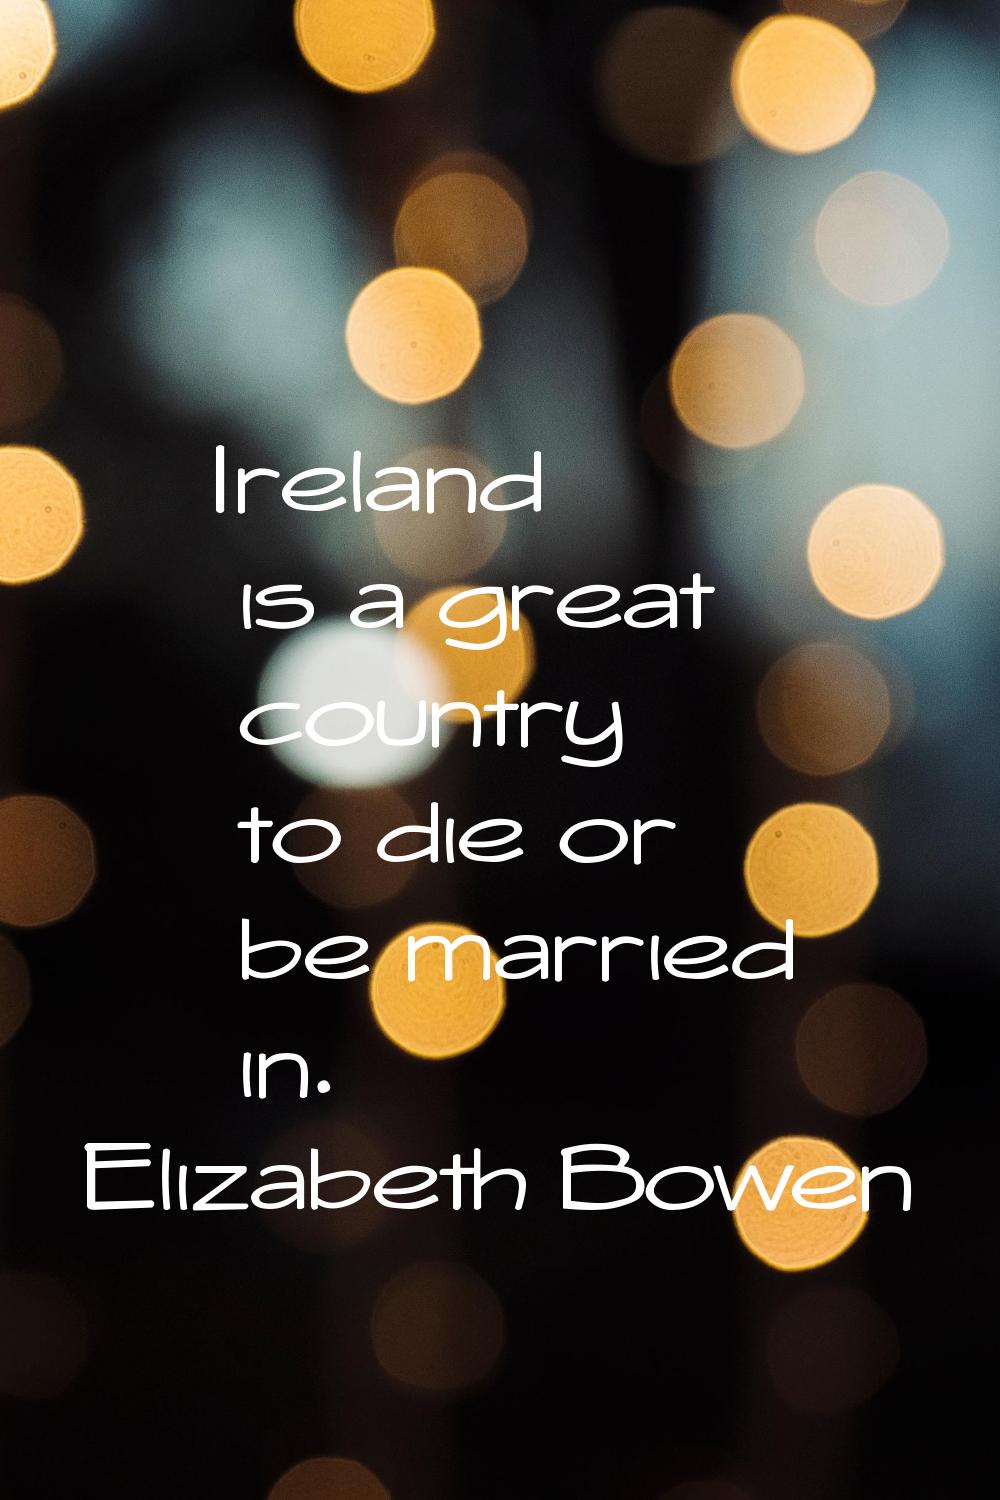 Ireland is a great country to die or be married in.